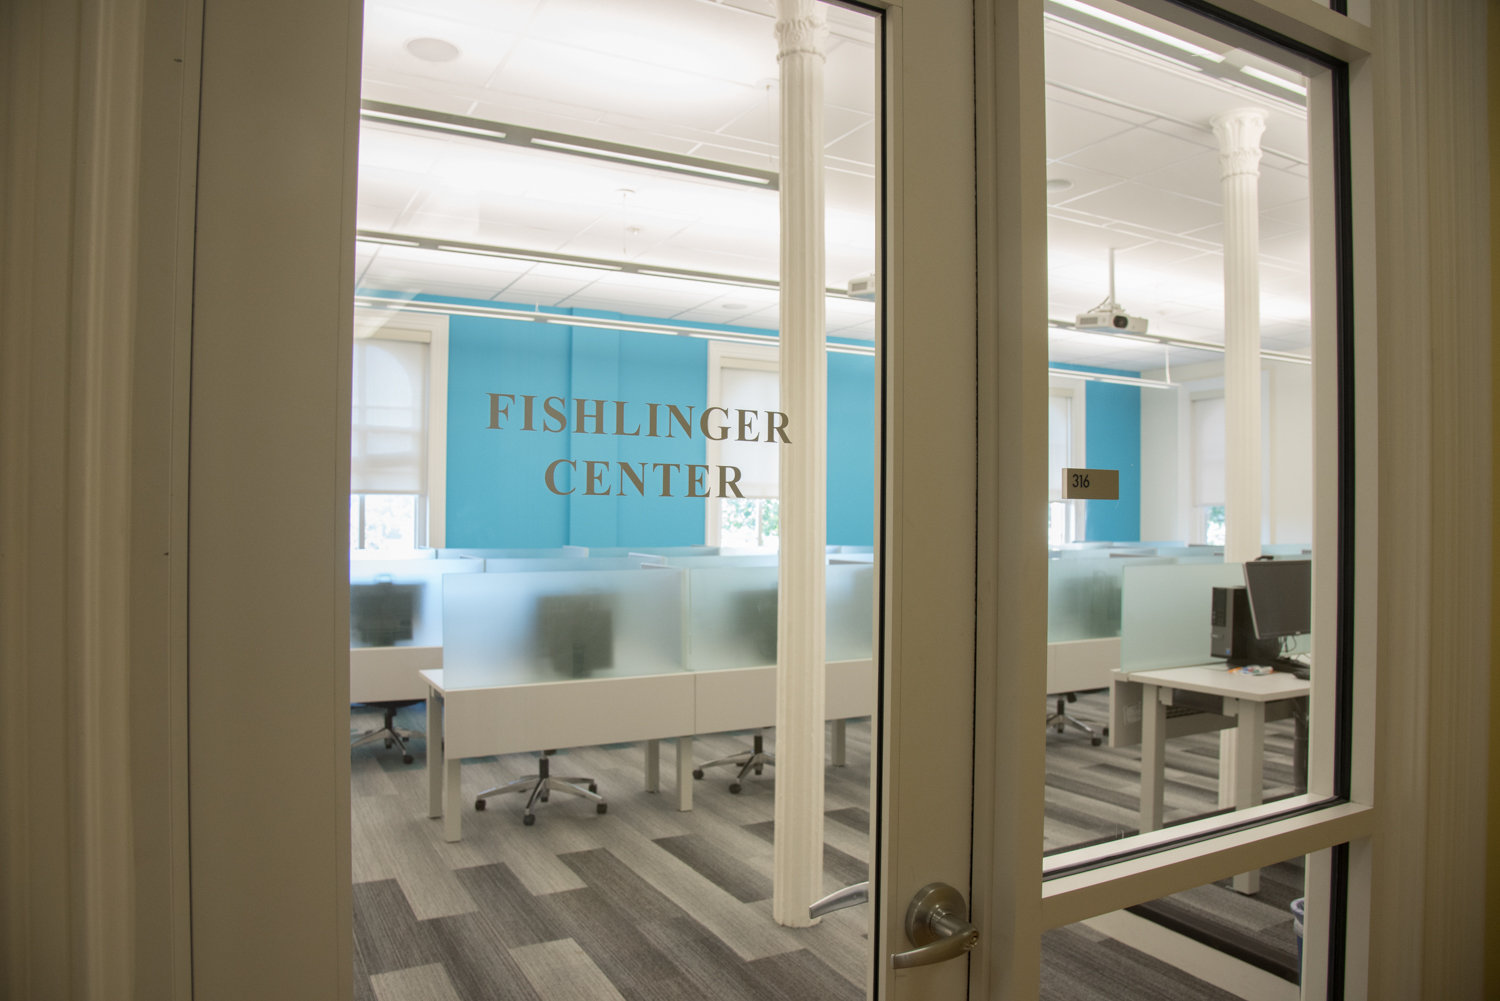 In addition to its main Fishlinger Center, the College of Mount Saint Vincent opened a second space of the same name specifically for undergraduate research.